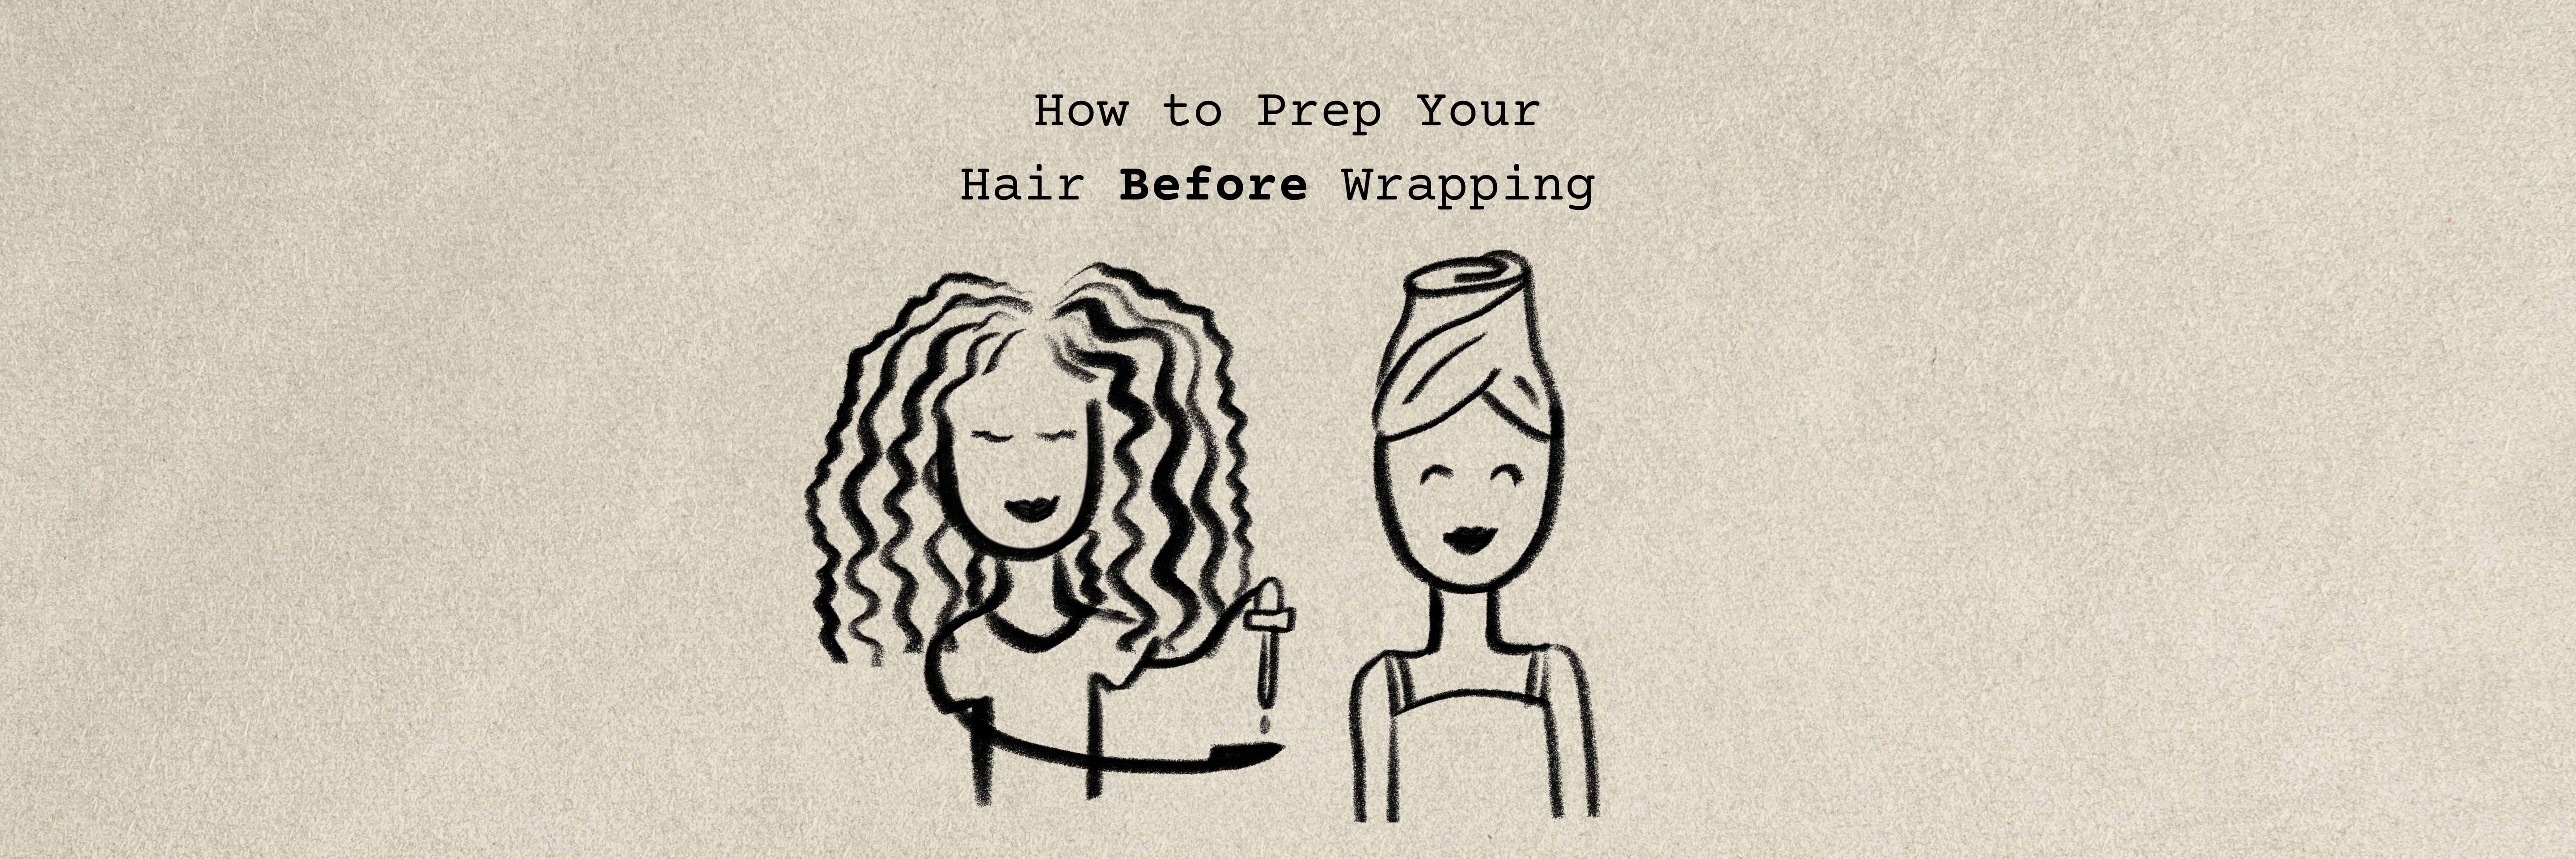 How to Prep Your Hair Before Wrapping